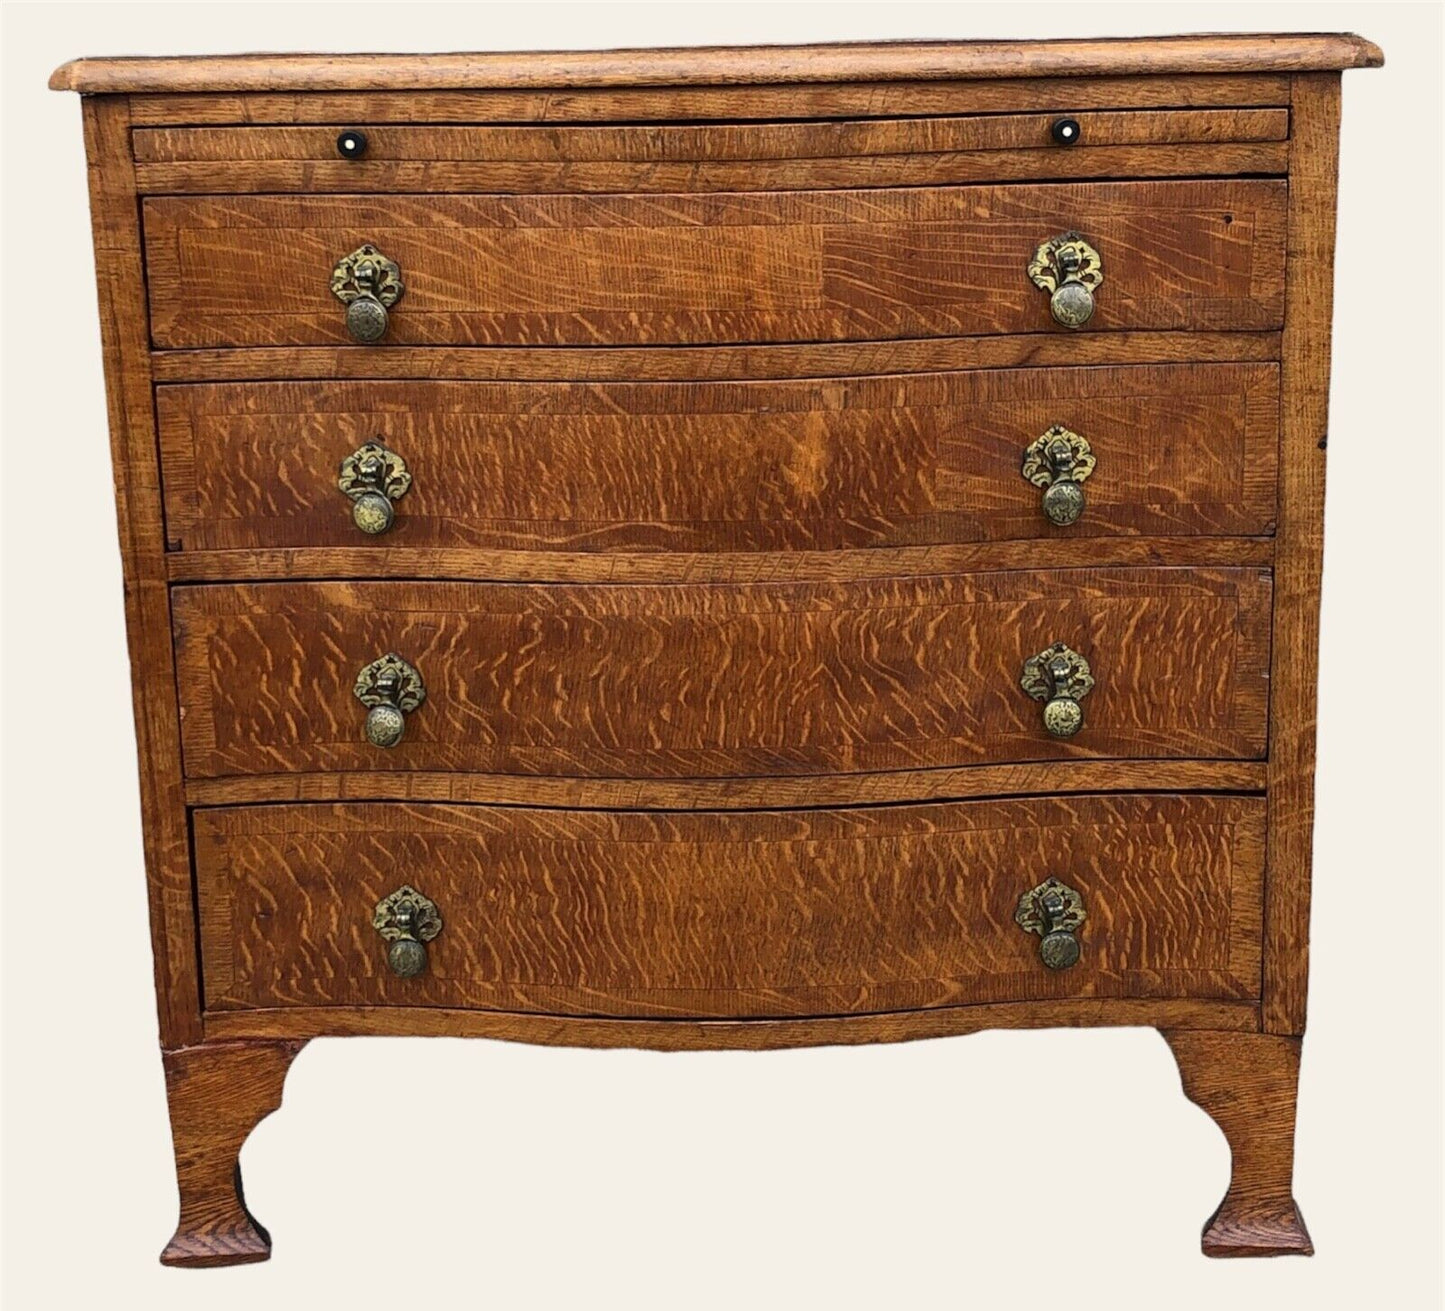 000938....Chest Of Drawers - Handsome Vintage Arts And Crafts Style Chest ( sold )